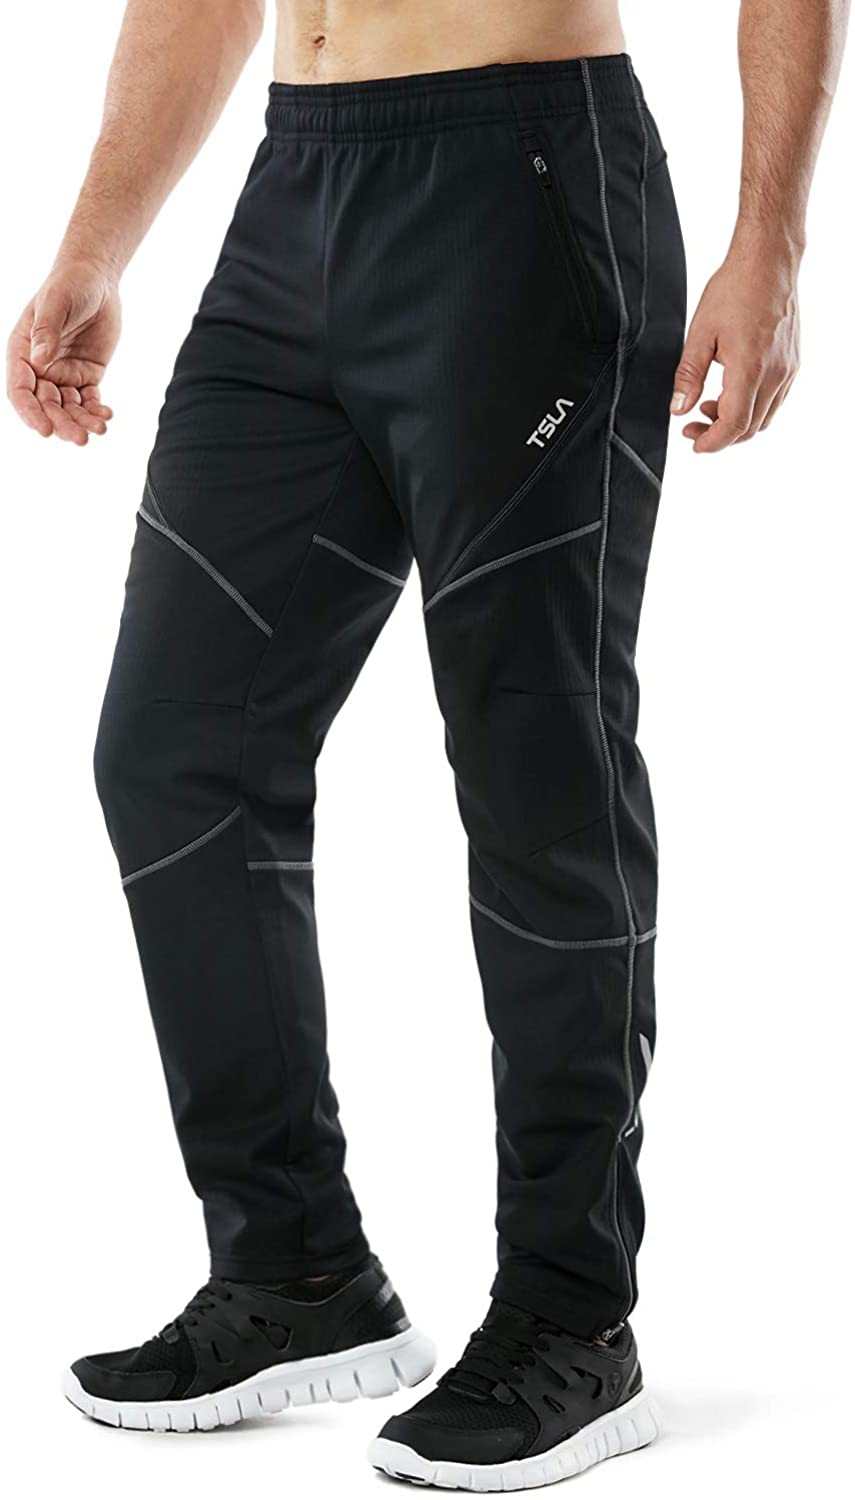 TSLA Mens Windproof Cycling Thermal Fleece Winter Pants Running Hiking Cold Active Bottoms Sweats 